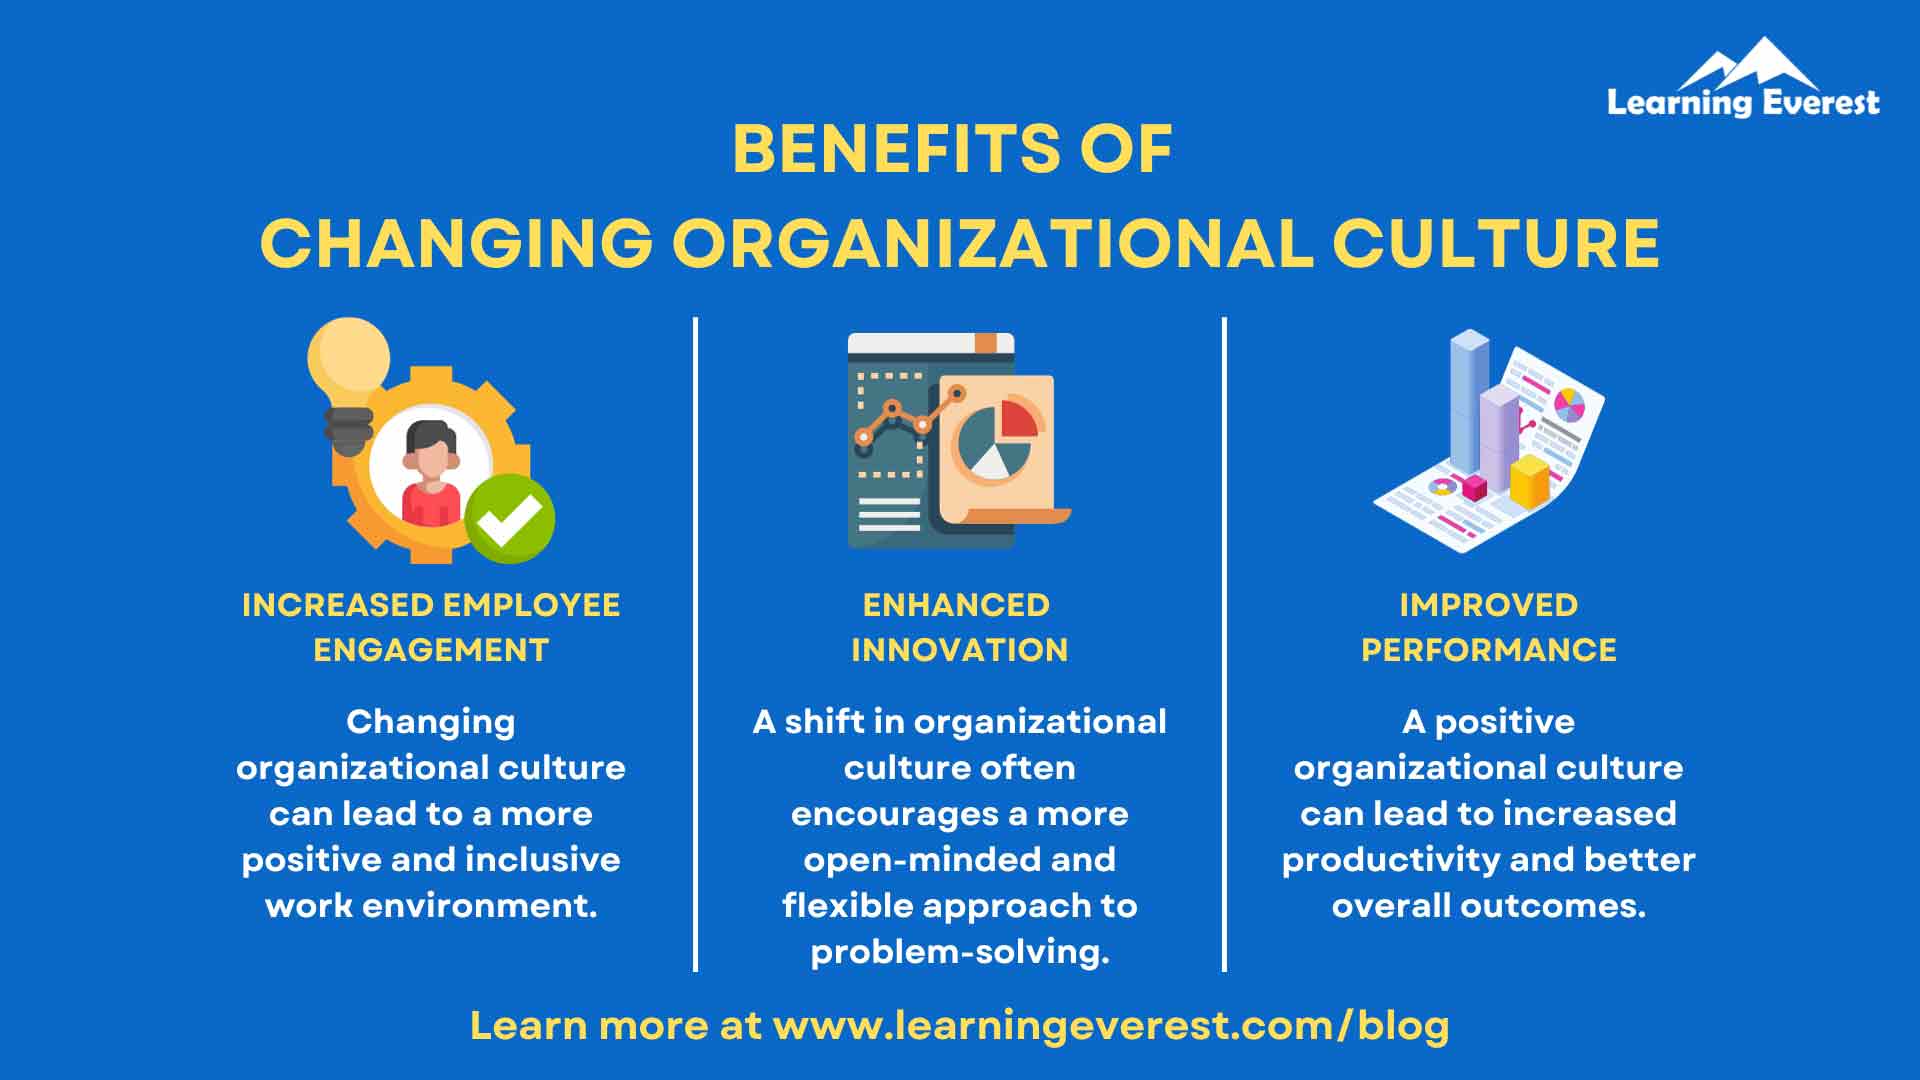 Benefits of Changing Organizational Culture